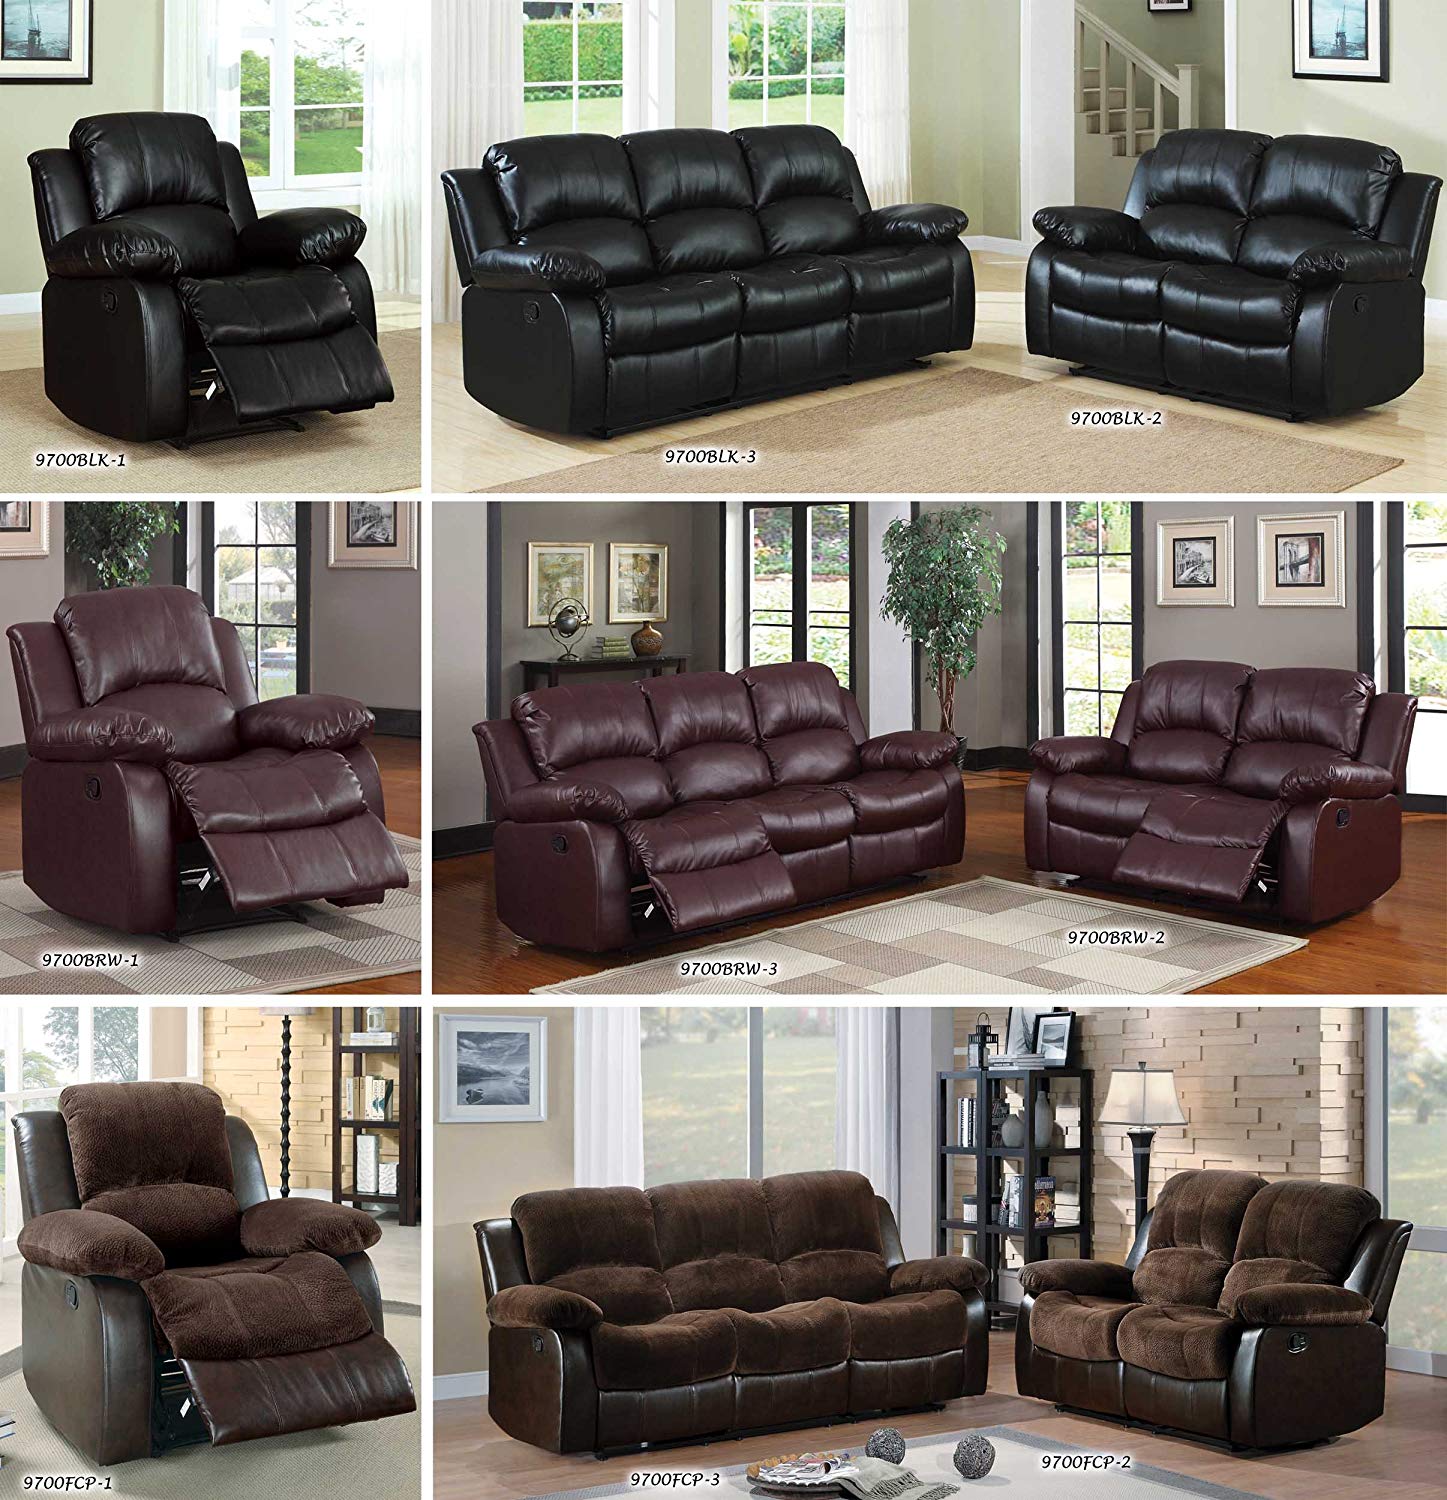 Best Prices Homelegance Leather Reclining Sofa Review